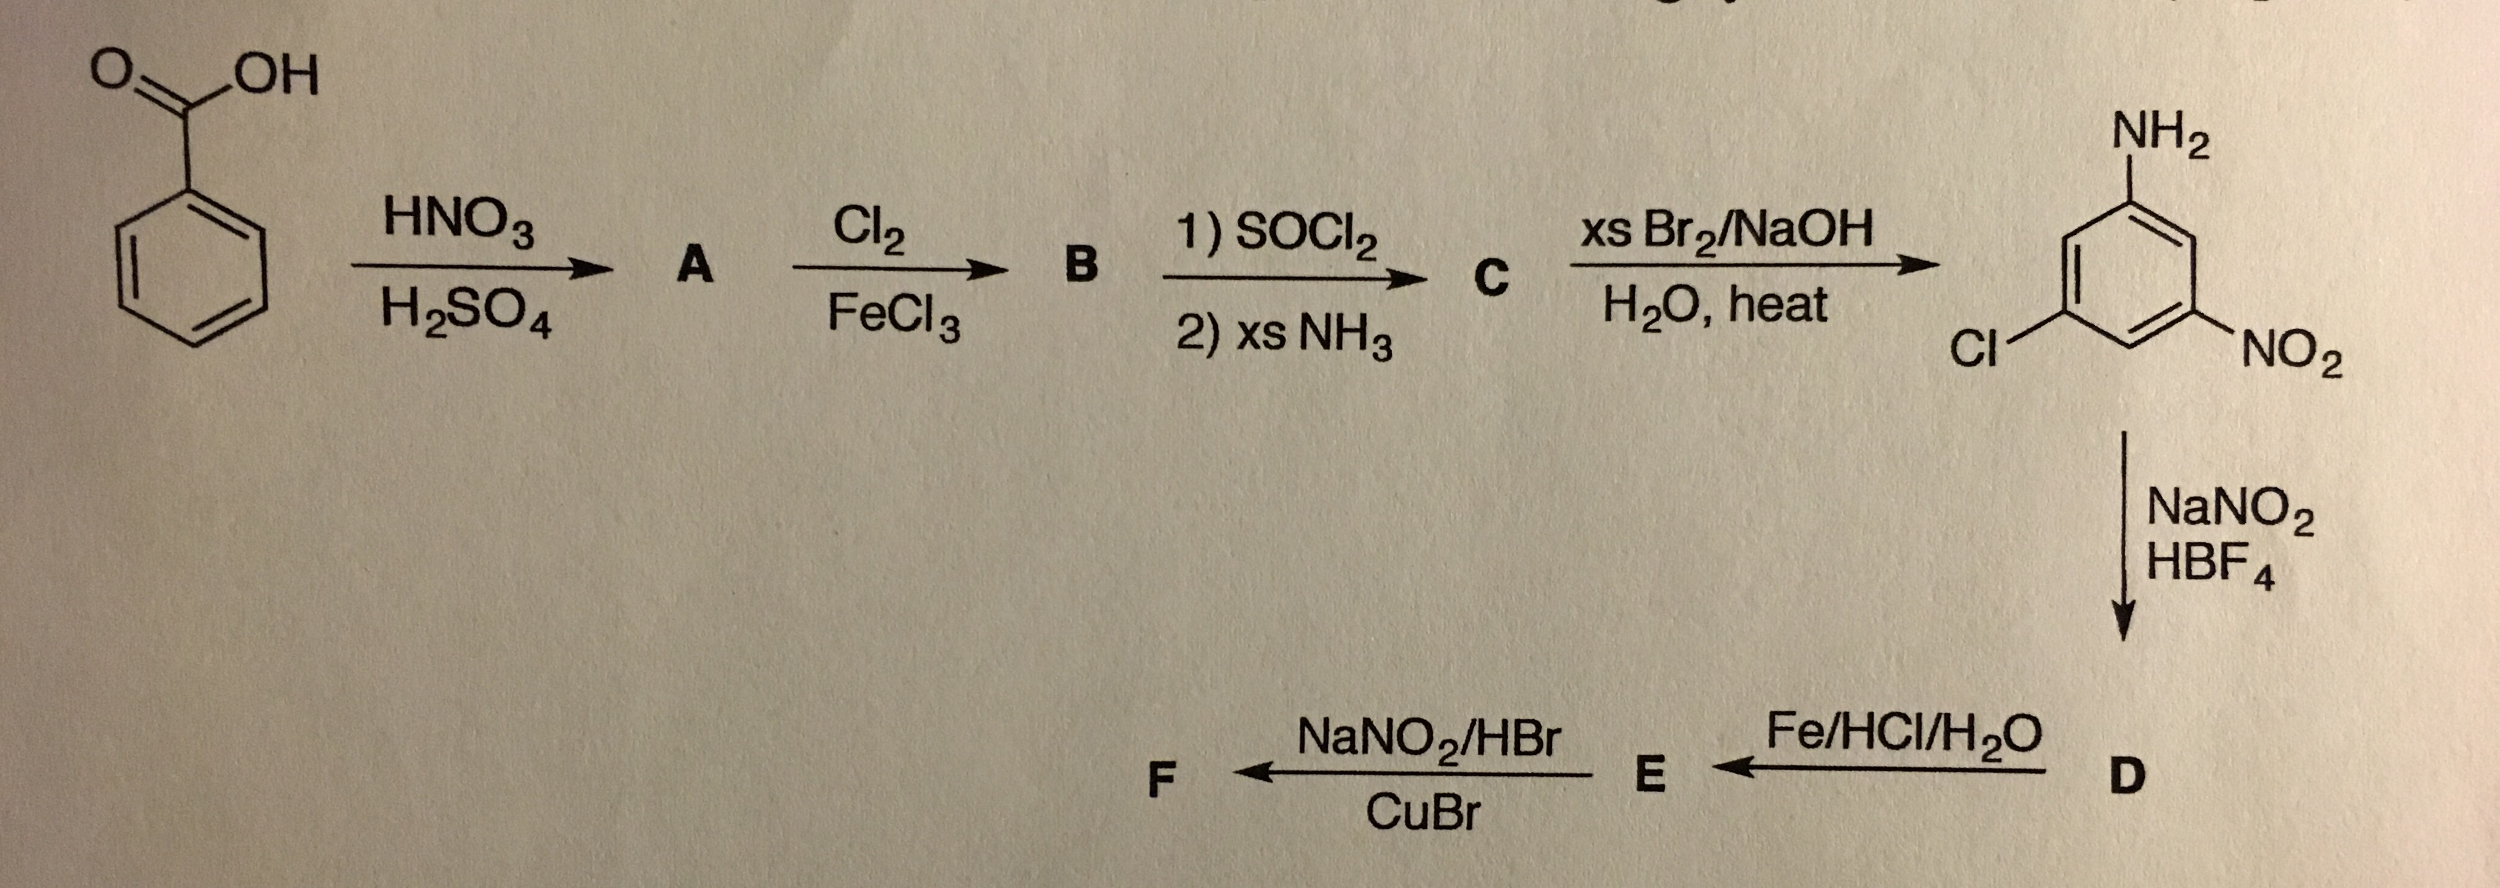 K2co3 fecl3 naoh. Ch3nh3br + hno2. Бензол hno2. Метилбензол + 2cl2 al2o3. Hno3 h2so4.